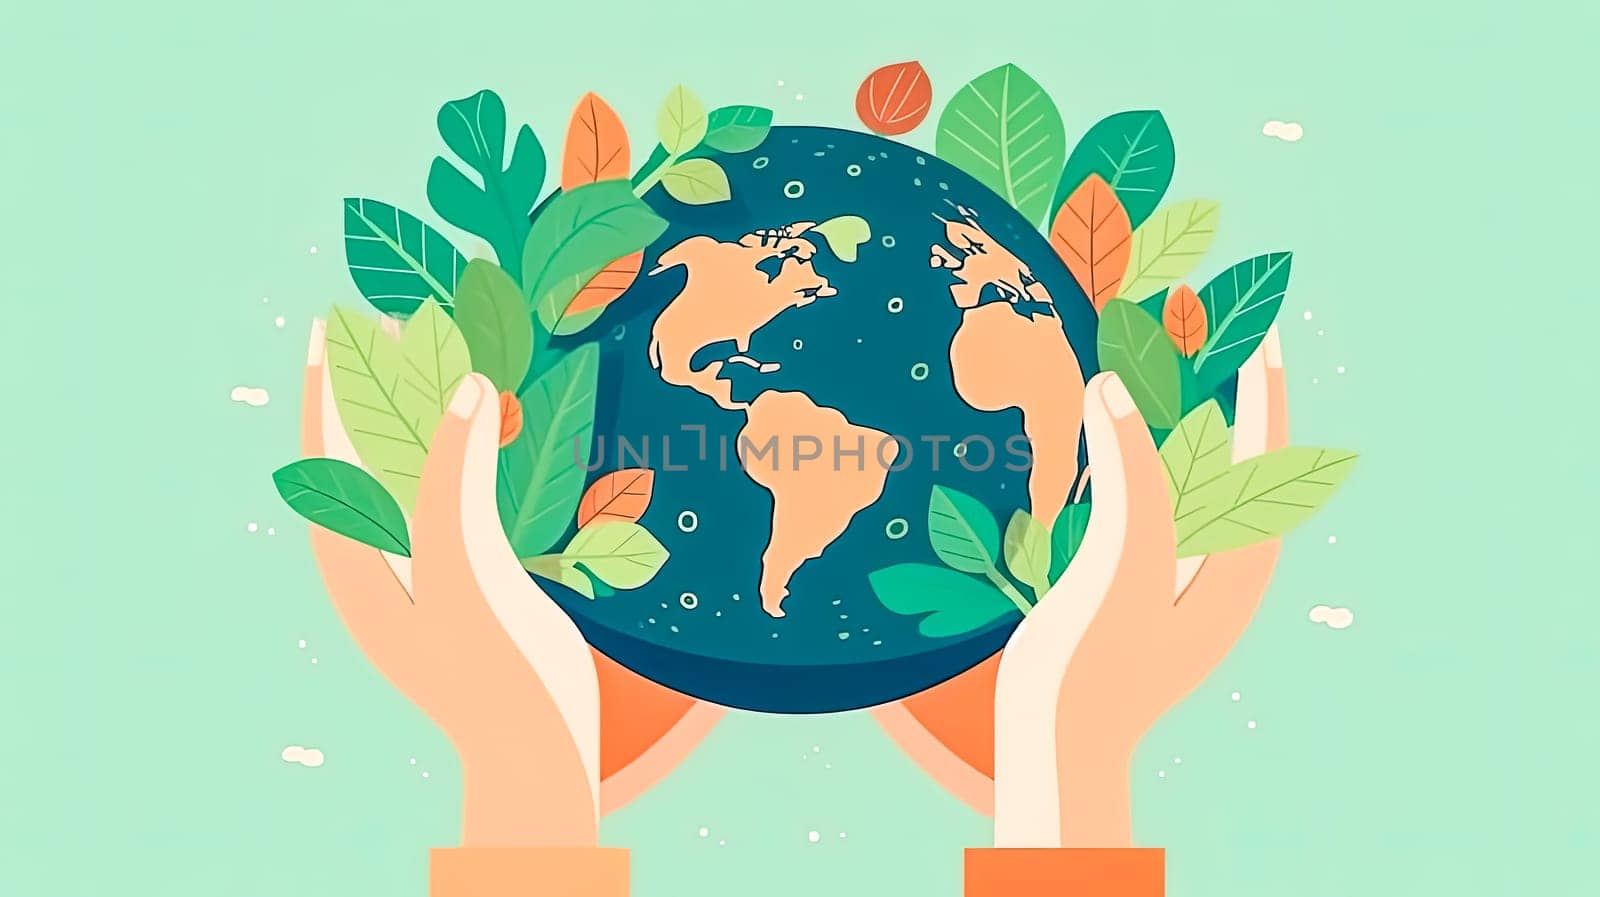 In caring hands, A man holds the globe, illustrating the responsibility for nature conservation an impactful Earth Day tribute to our precious planet